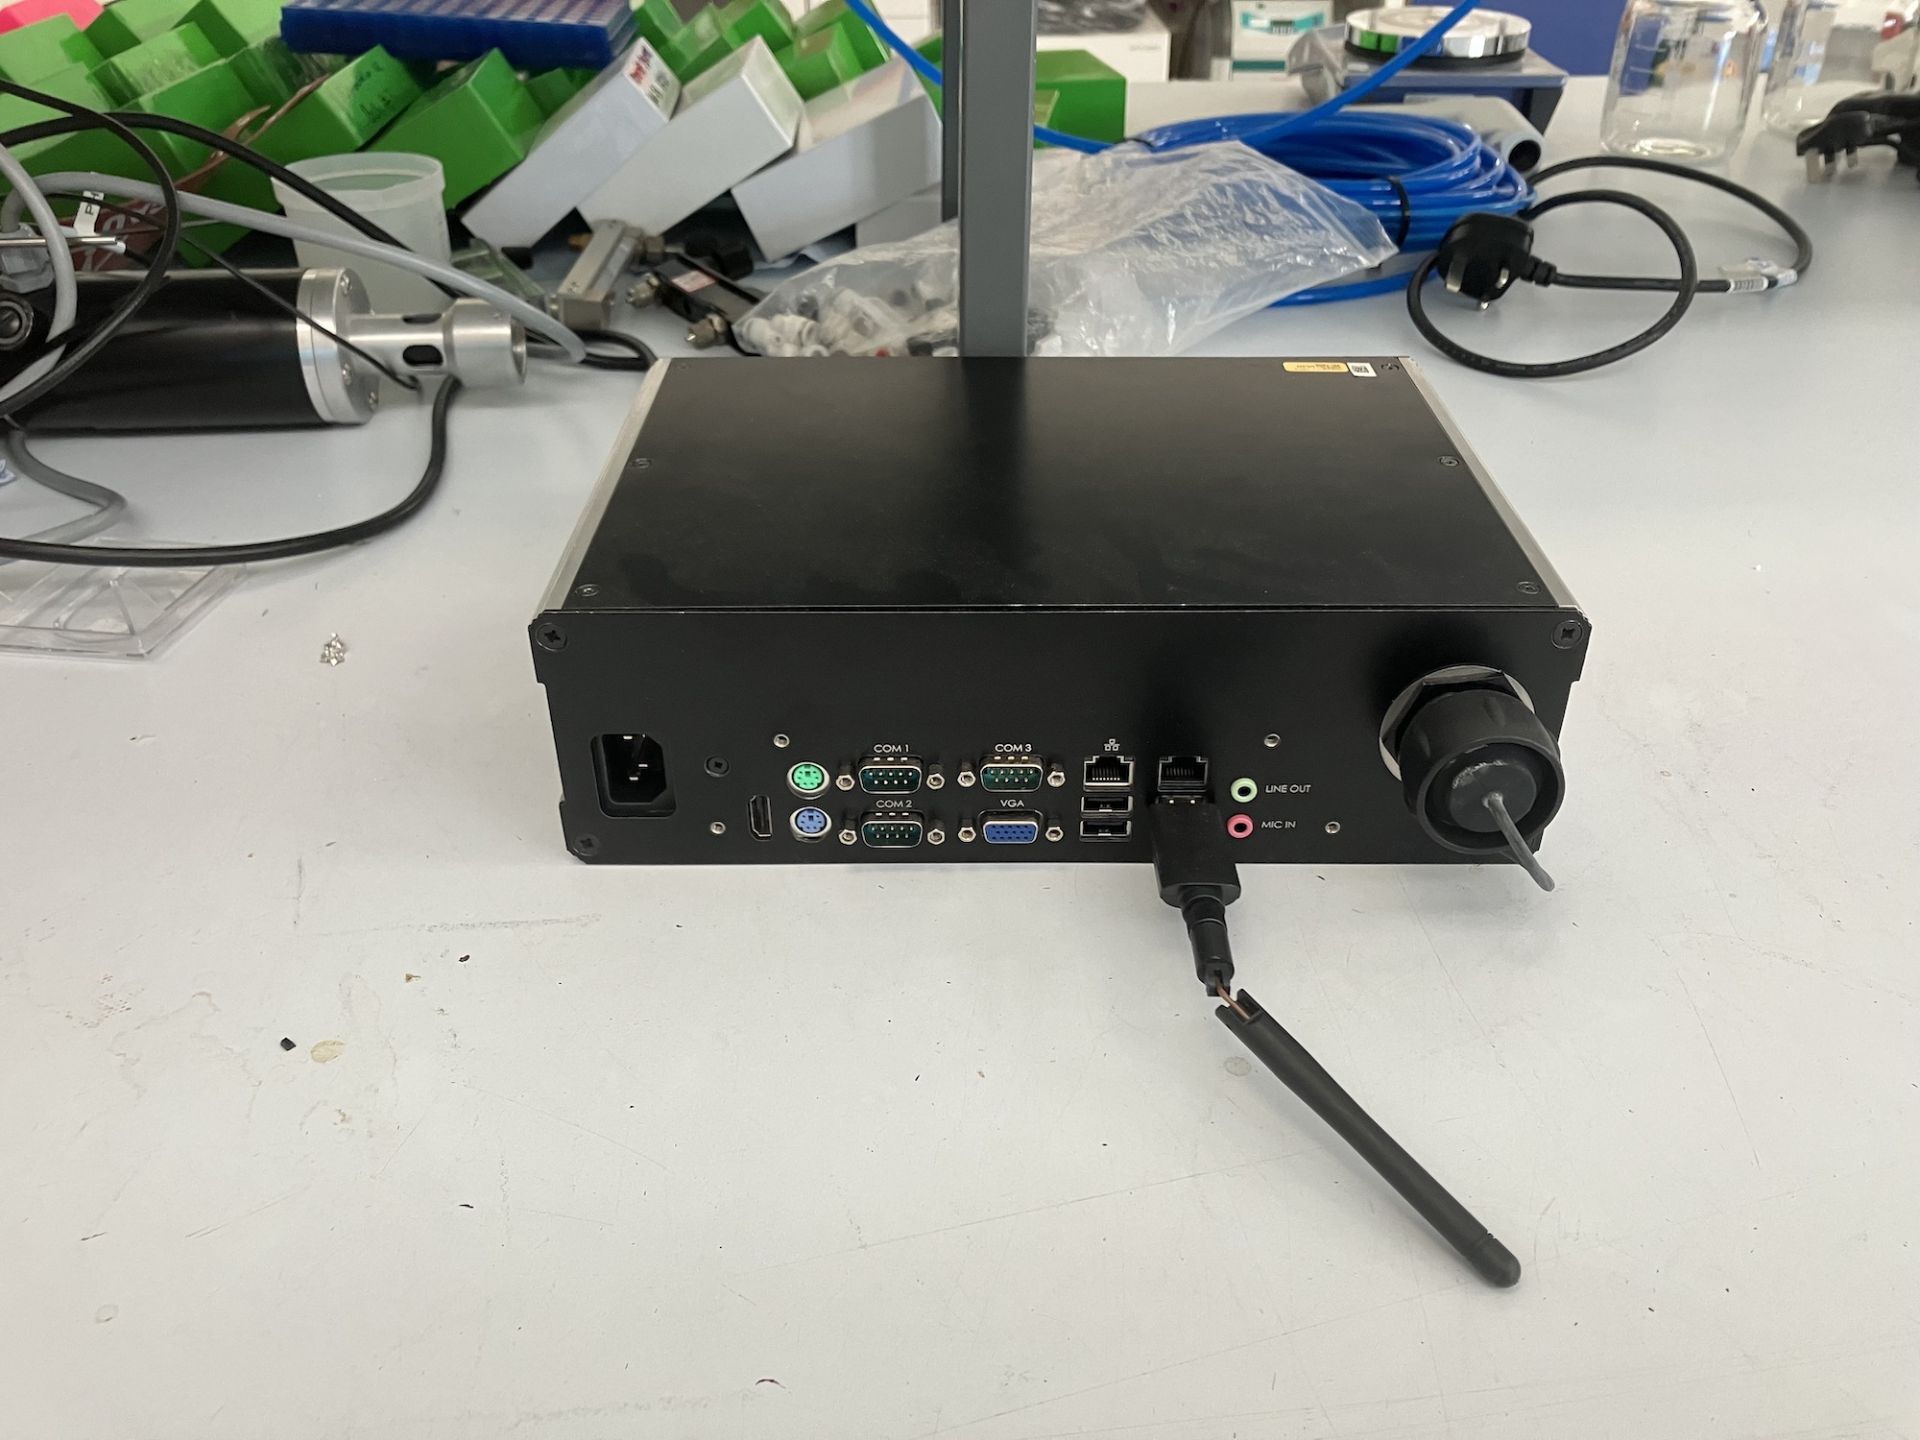 Keit spectrometer datalink box with Smart UPS 750 - Image 3 of 3